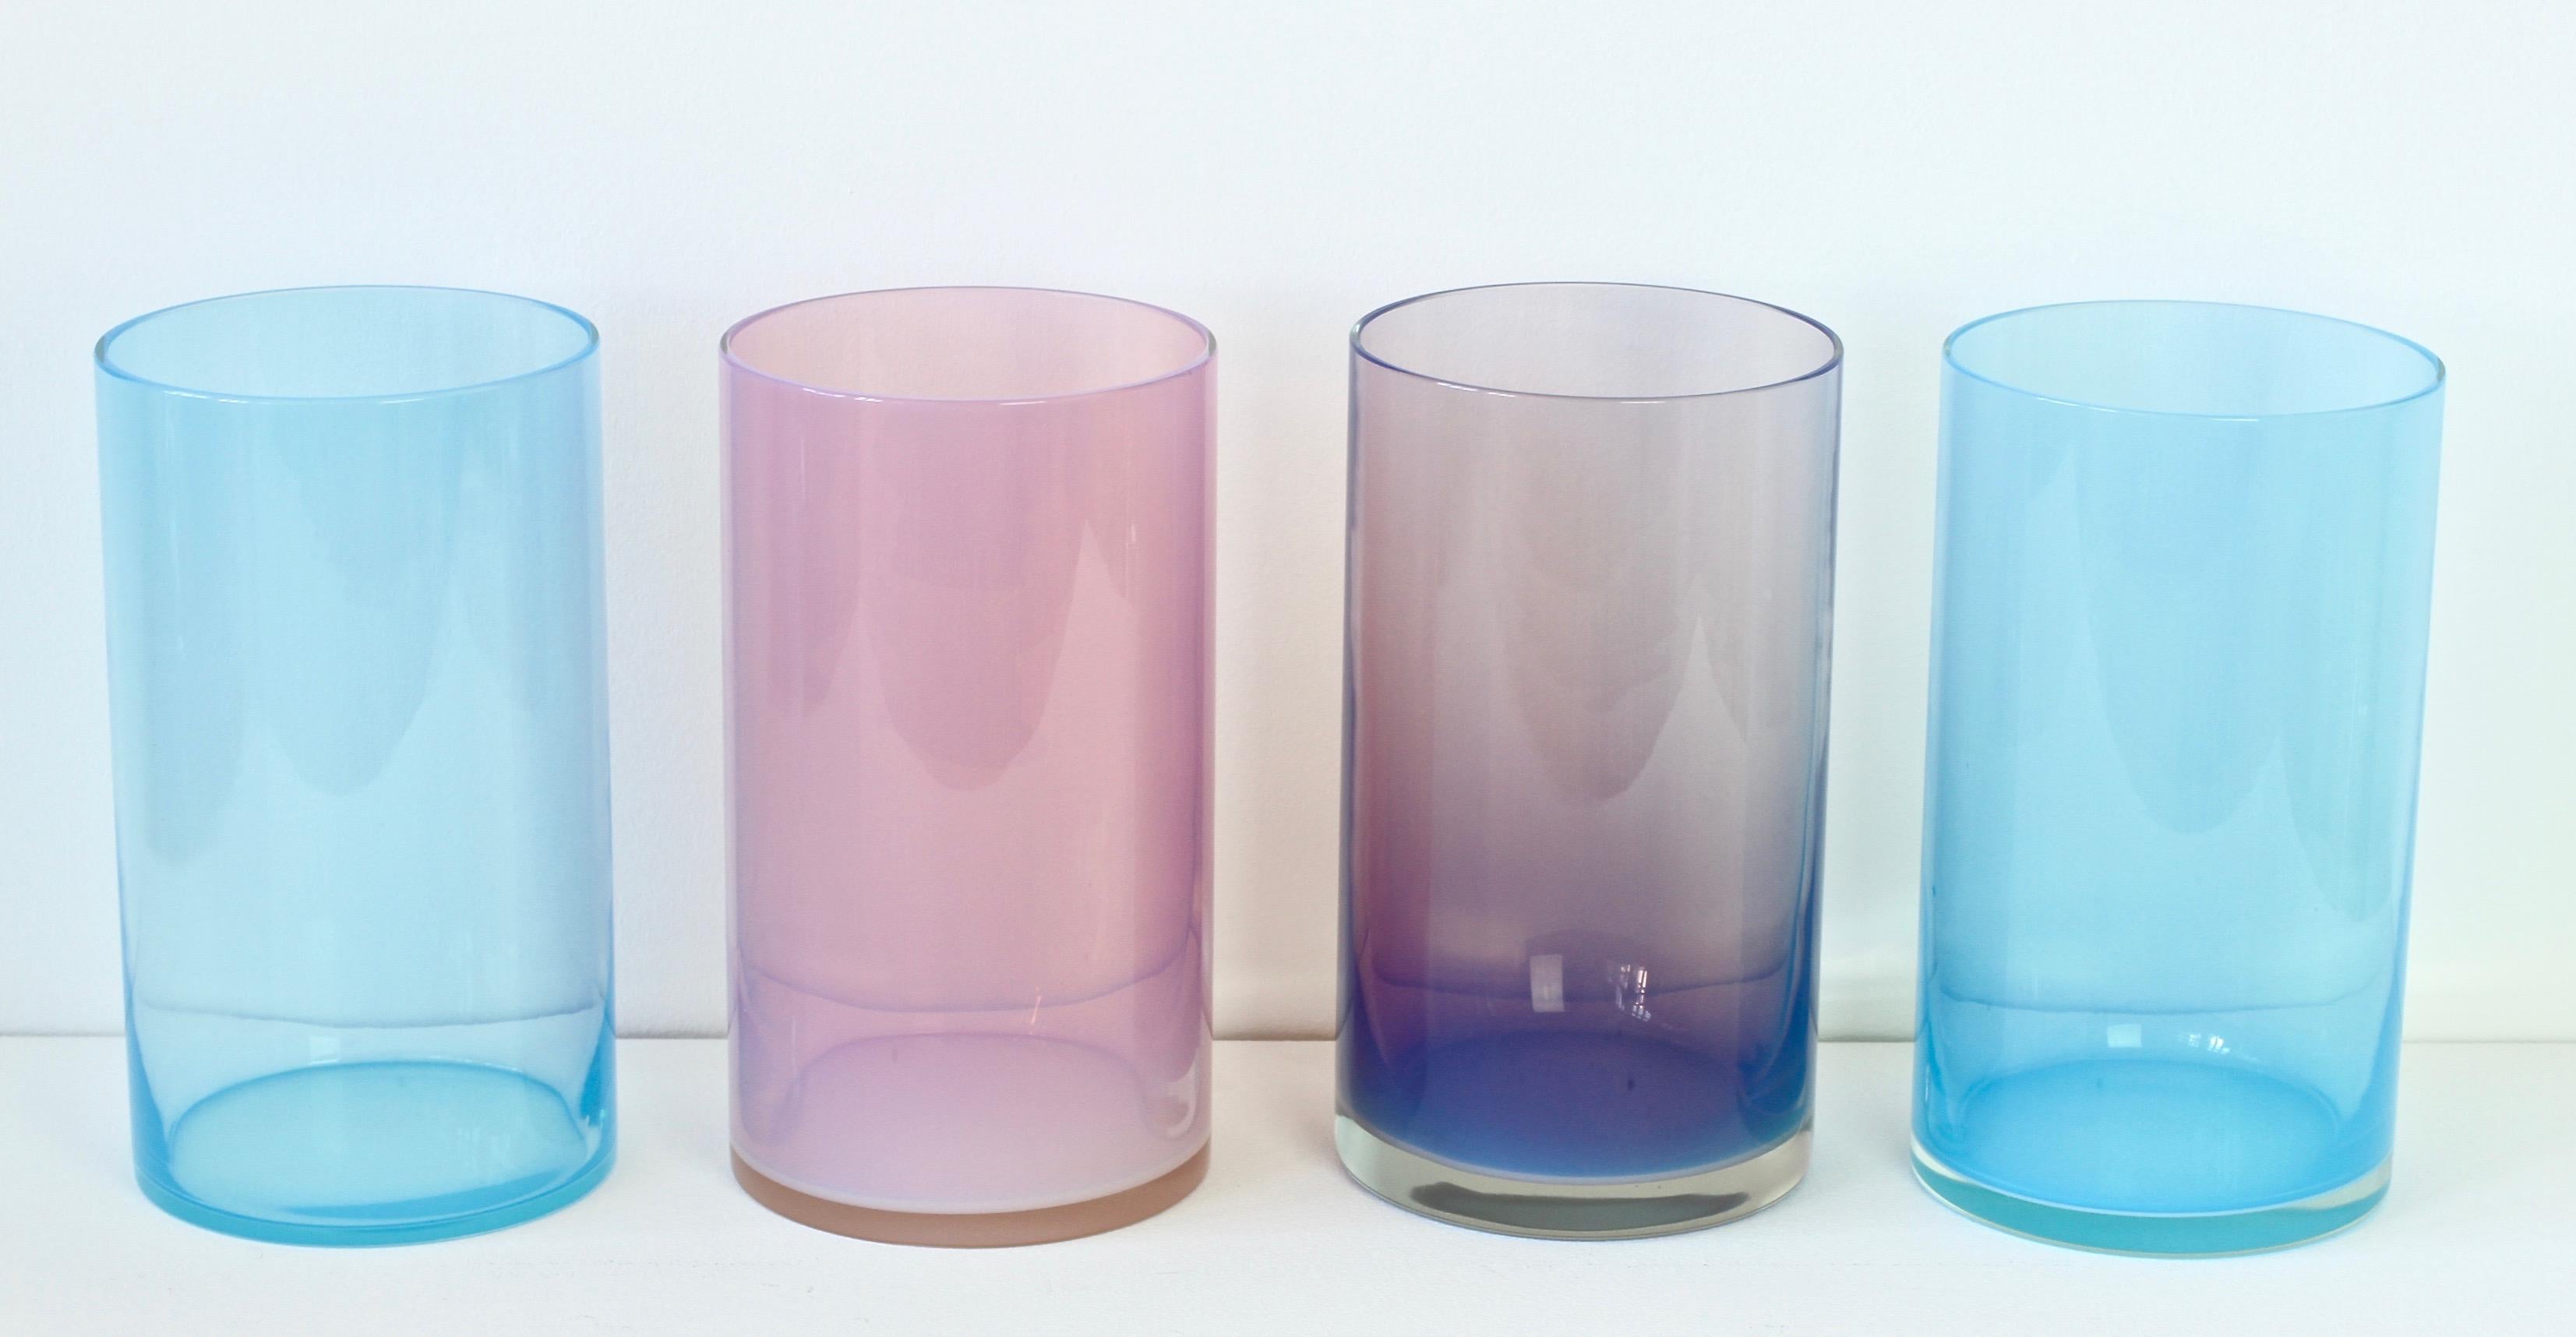 Signed midcentury, vintage set or ensemble of four 'Opalino' Murano glass vases or vessels designed by Antonio da Ros for Cenedese, circa 1970-1990 Wonderful translucent colors (colours) of vibrant blues, aubergine and pink. Simplistic yet elegant